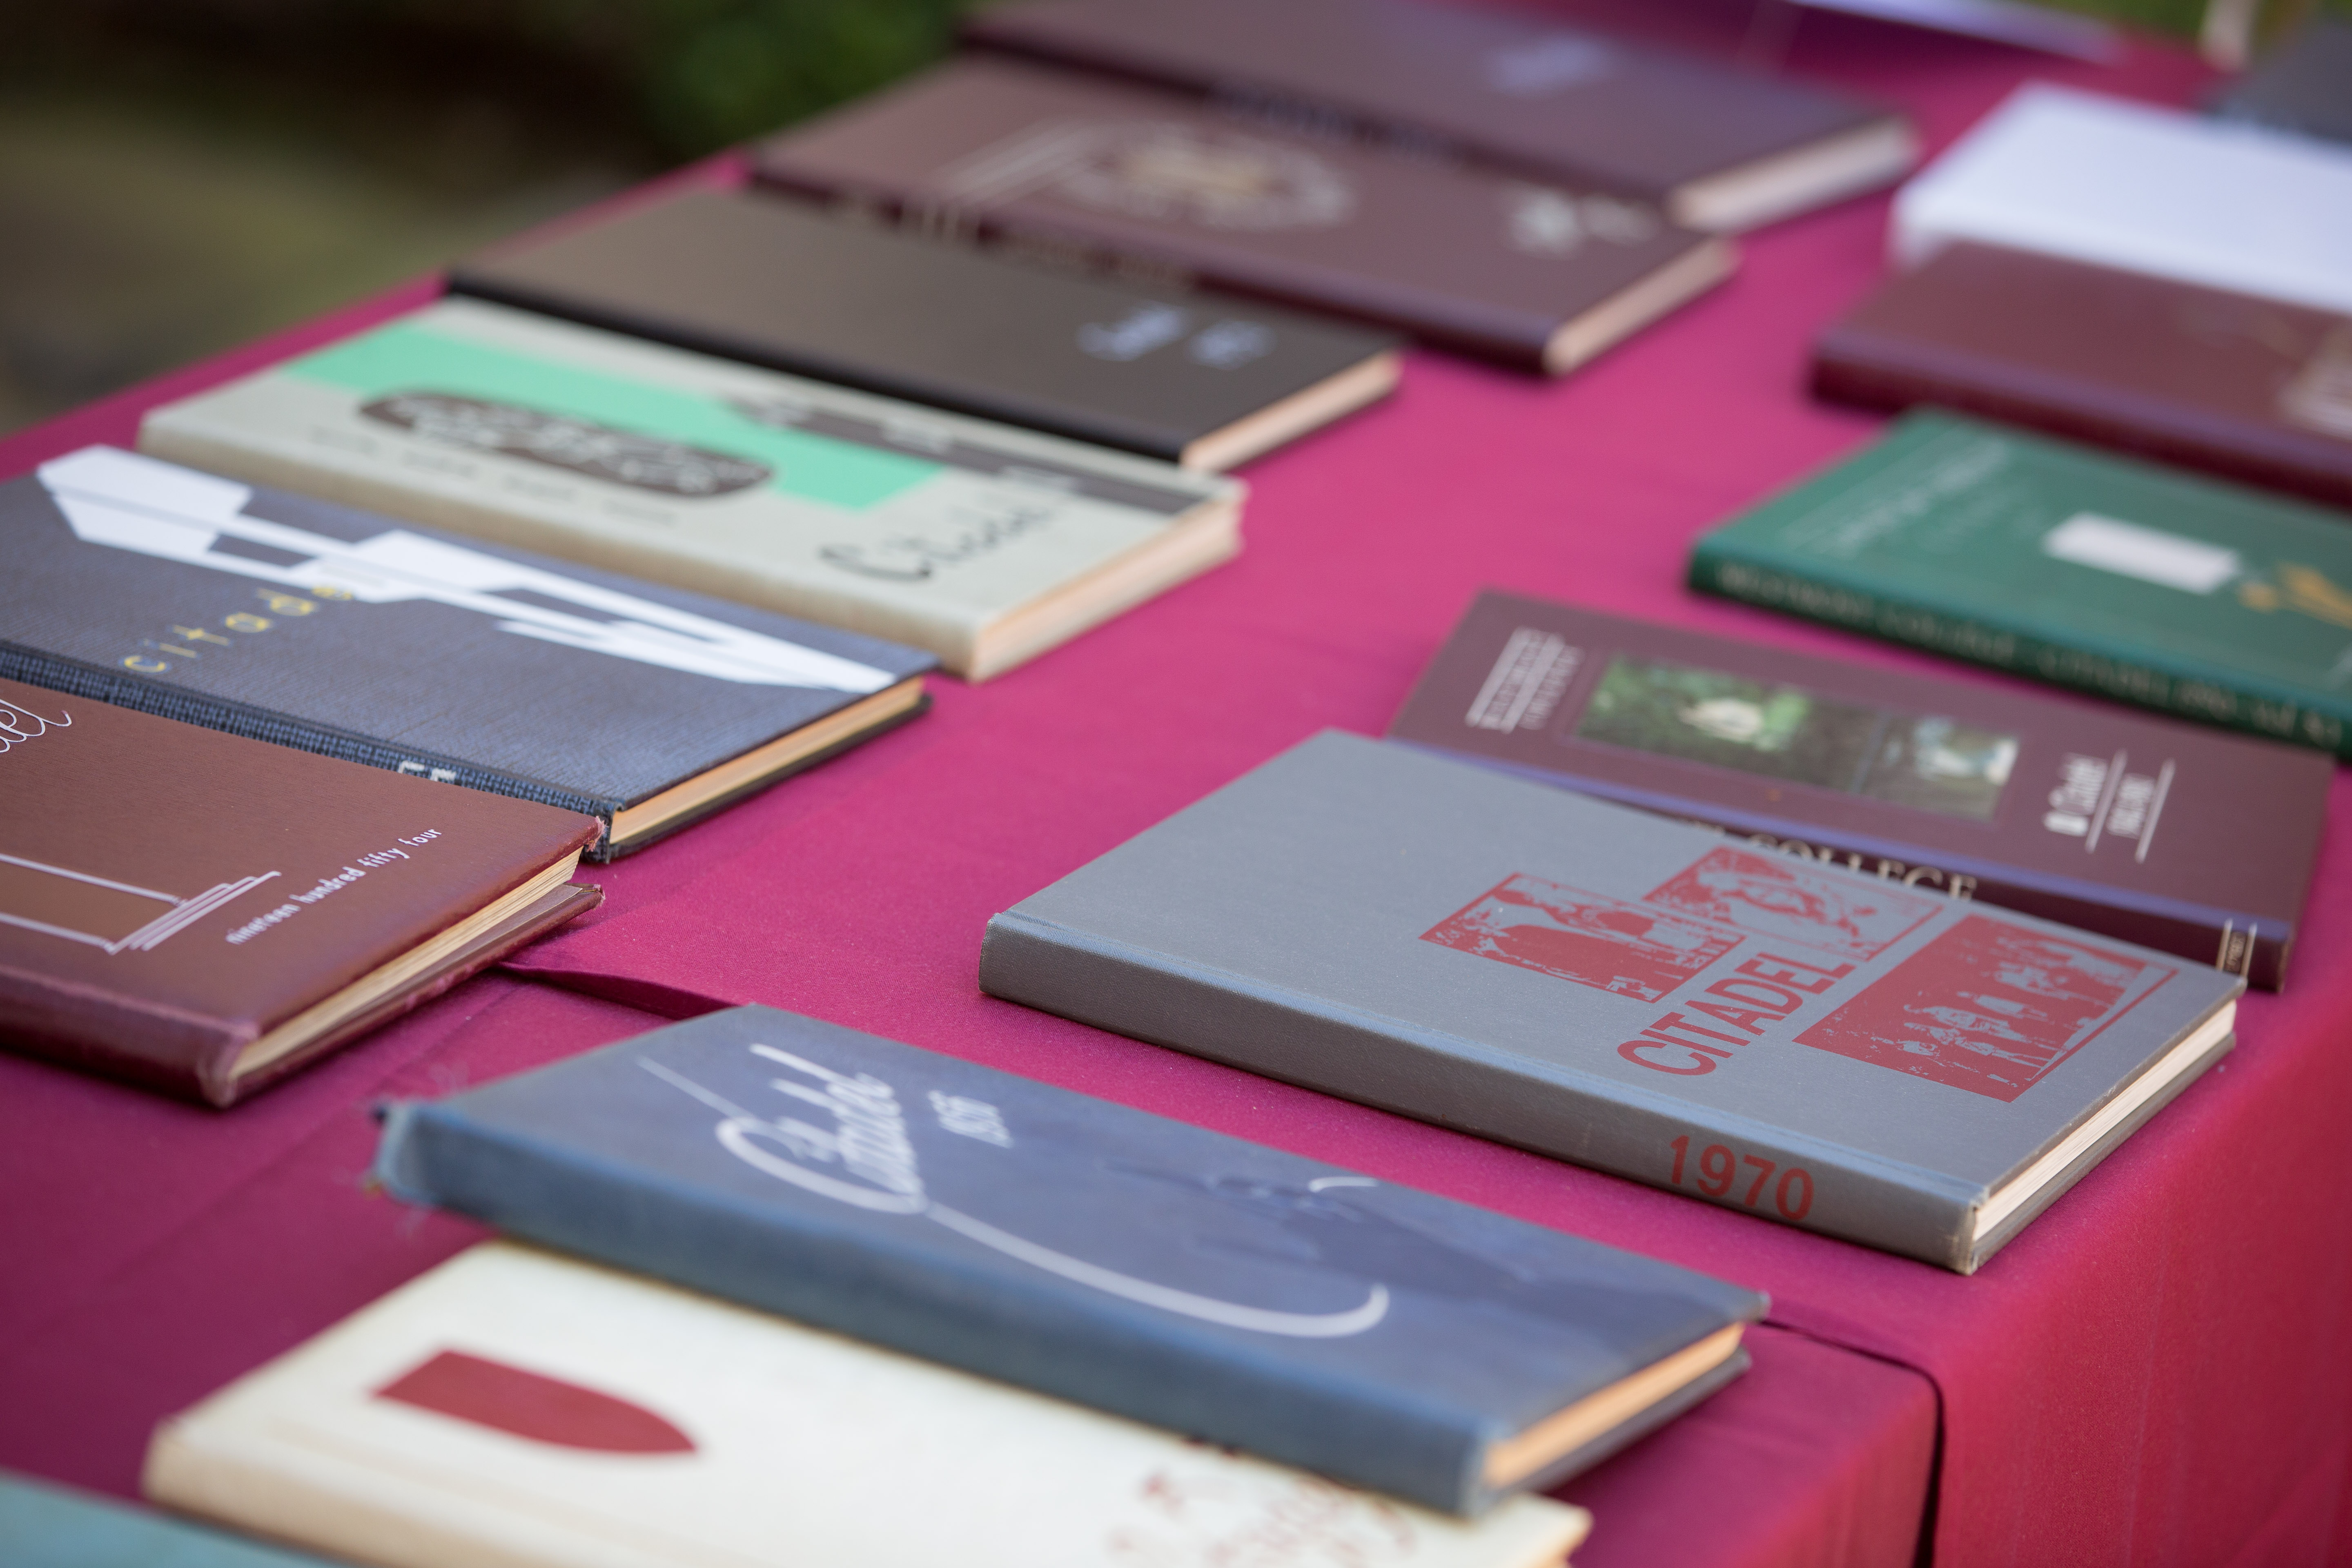 westmont yearbooks on table at homecoming